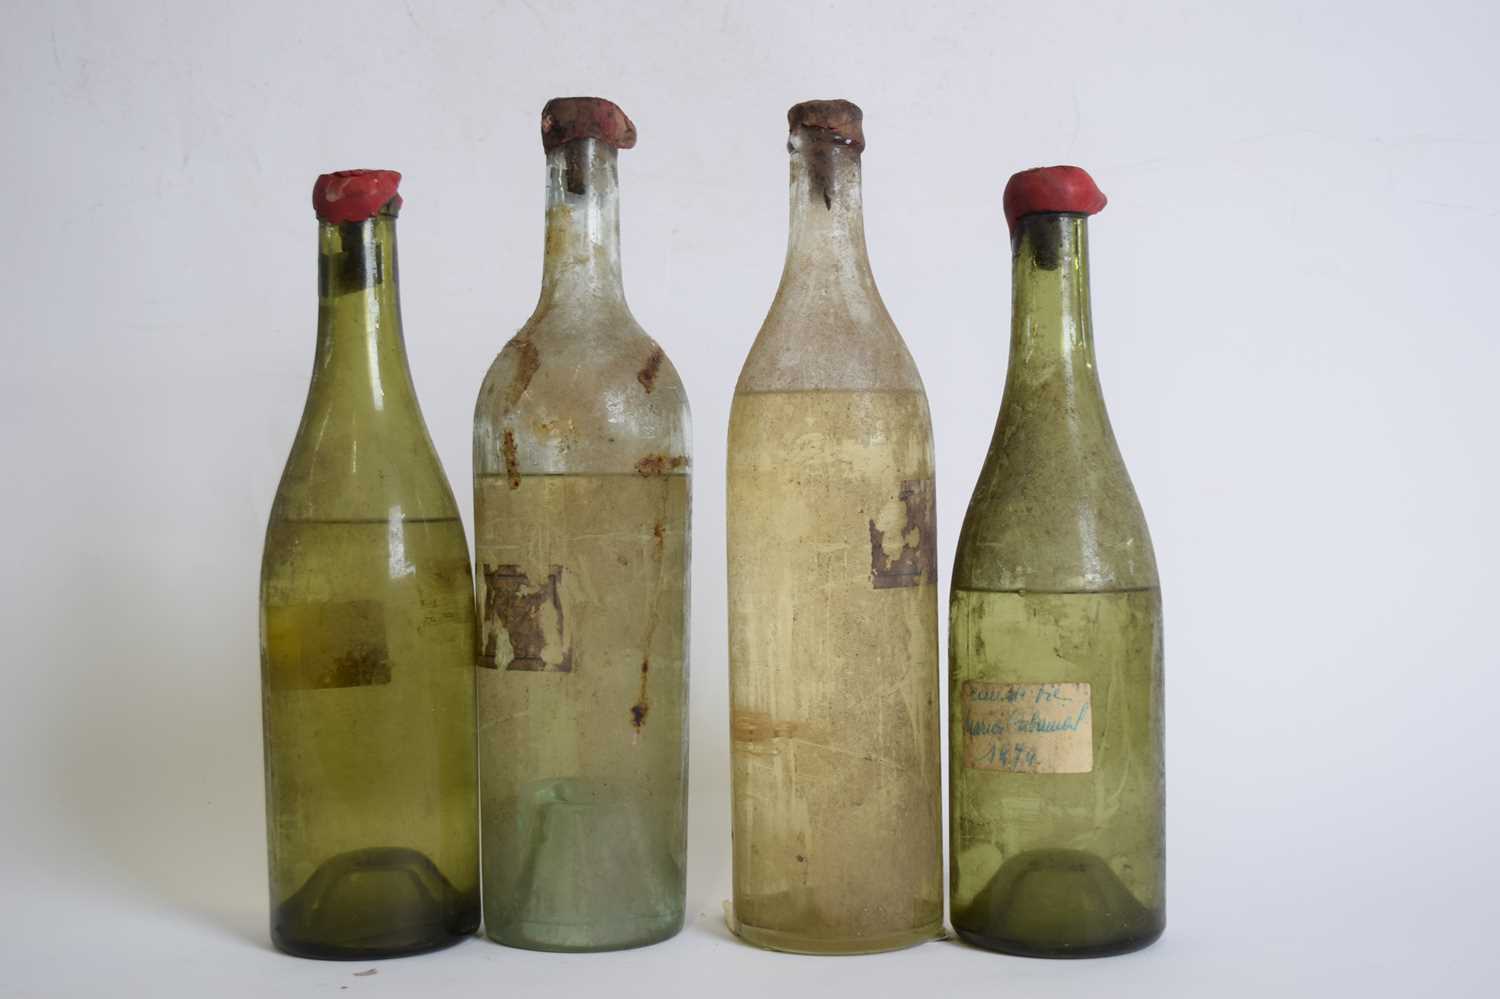 Four bottles of unlabelled unknown wine/spirits (levels vary)